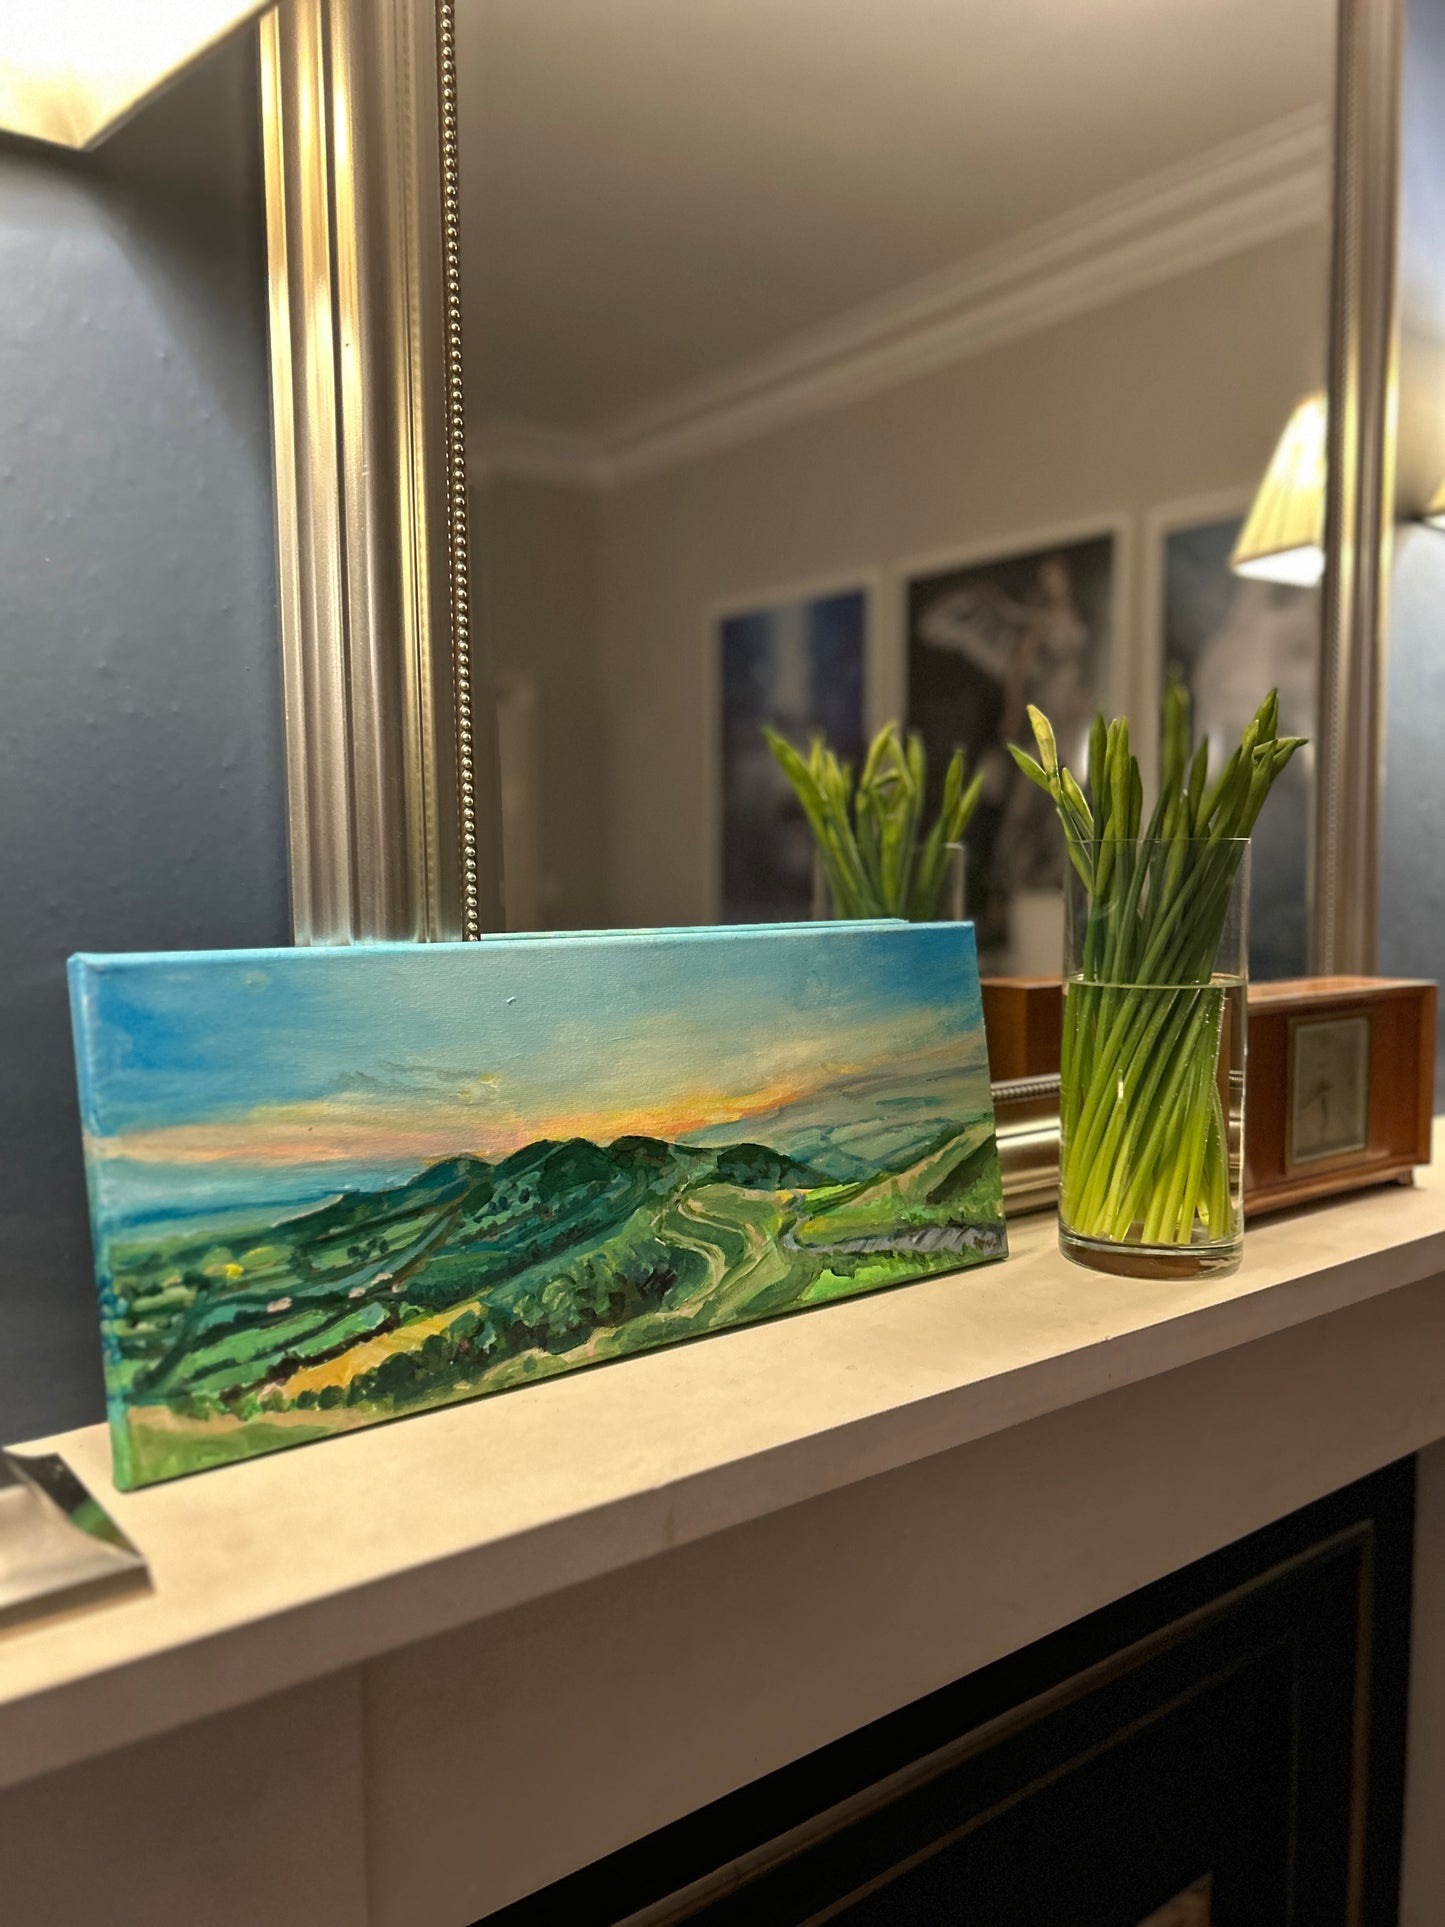 Original painting of Dawn at the Malvern Hills by Worcestershire Artist Margaret Powell displayed on a mantel piece in front of mirror